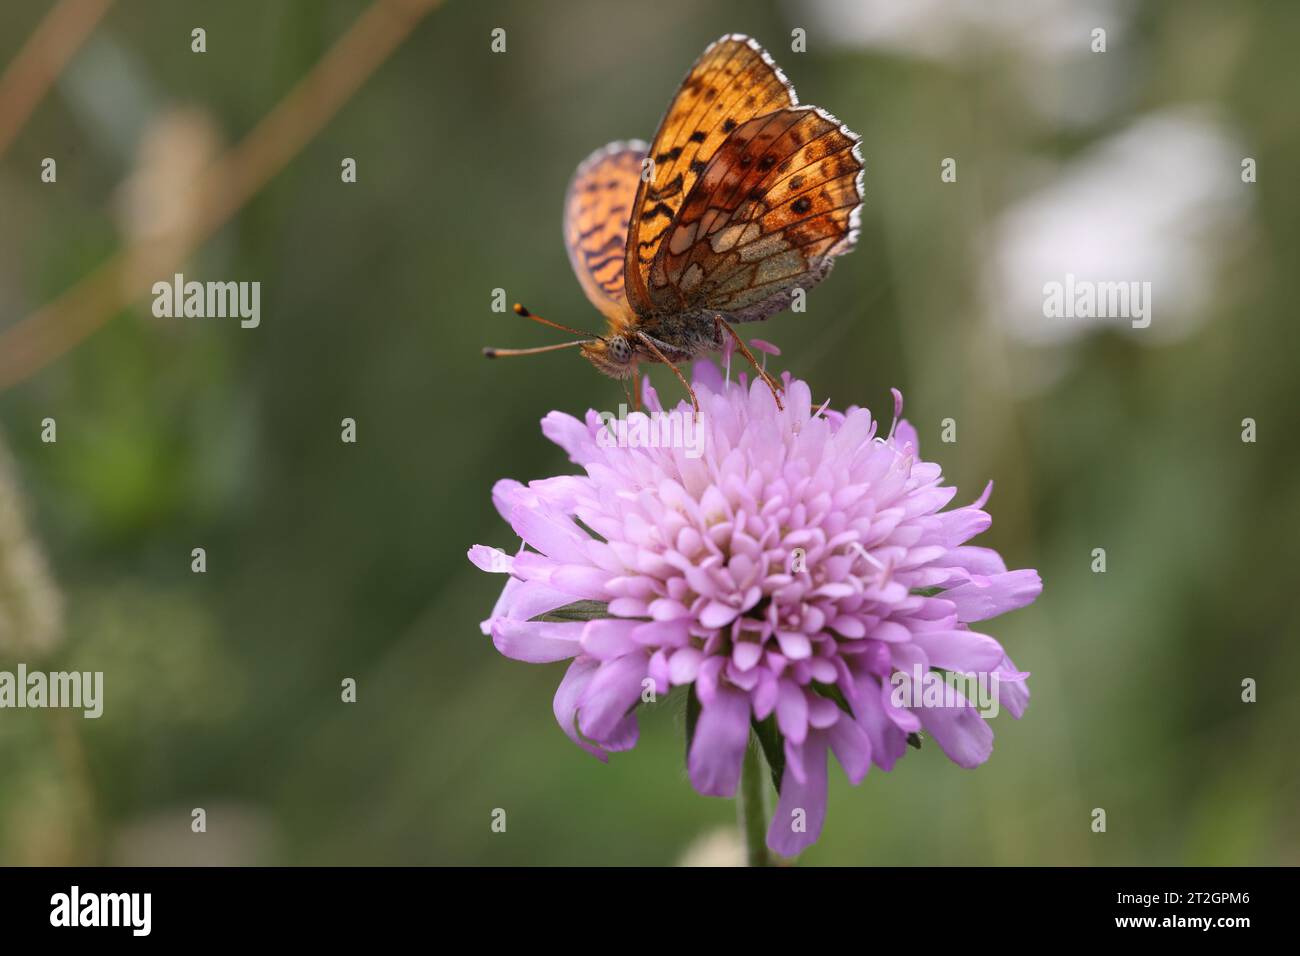 cranberry fritillary butterfly pollinating a purple scabiosa flower Stock Photo